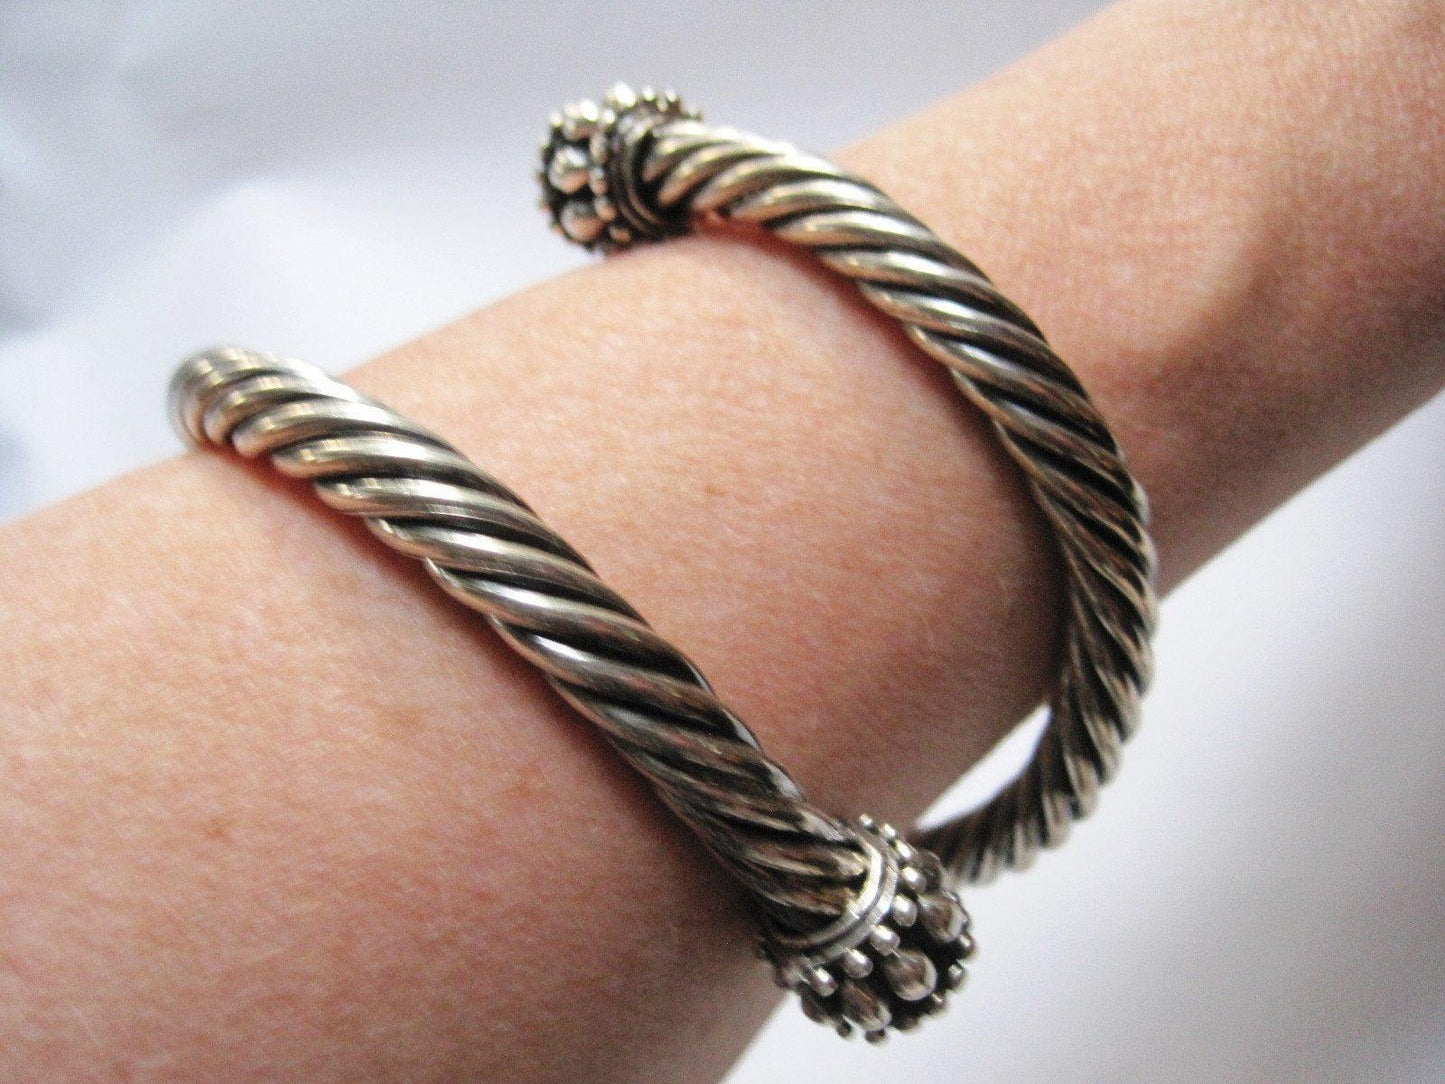 Sterling Silver and Onyx Mexican Cable Wrap Coil Bracelet - Anteeka